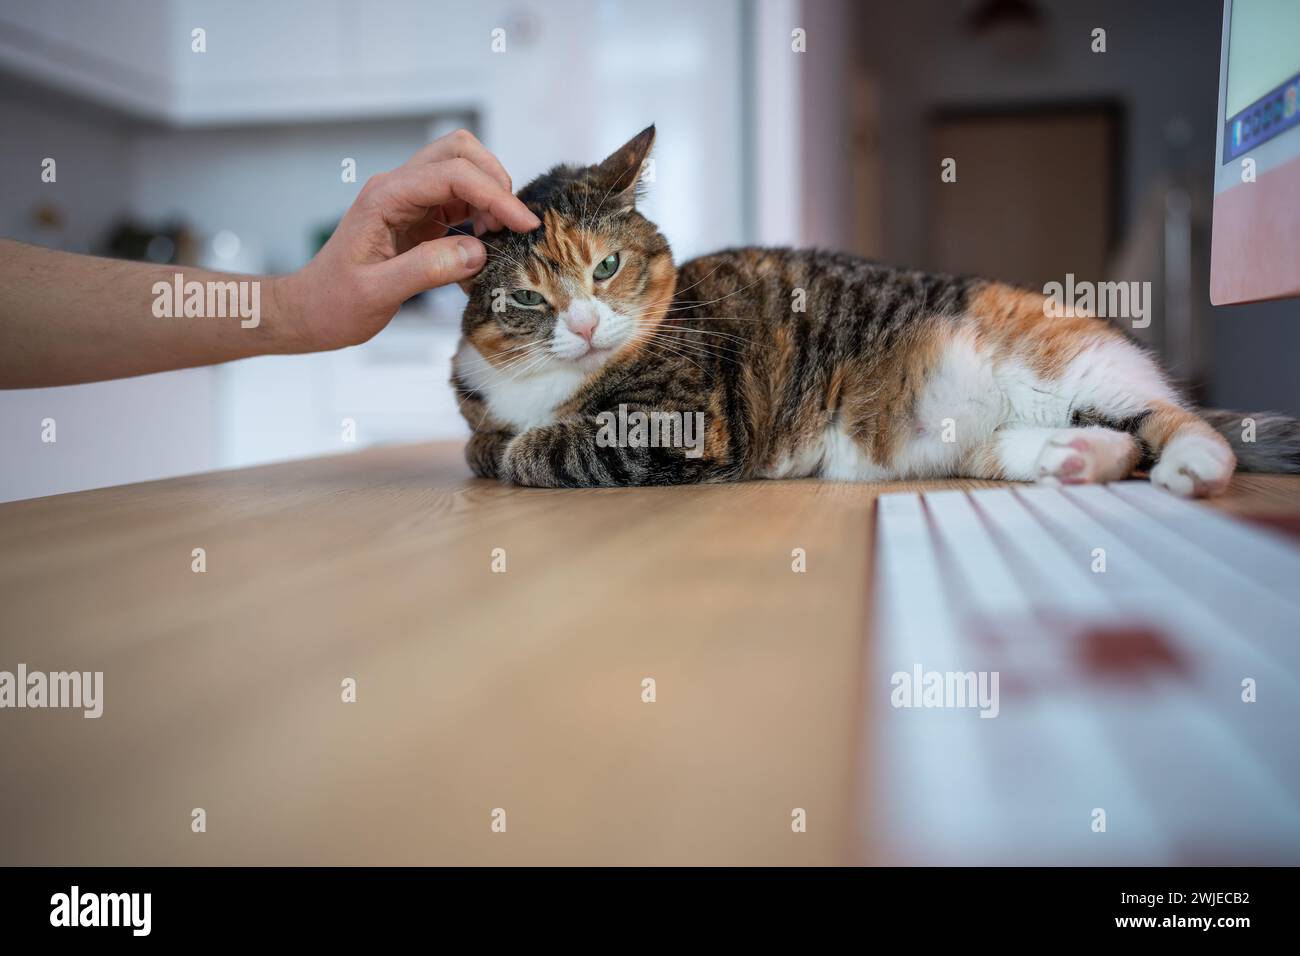 Home office with pet. Cat lying on table with computer distracting owner from work by looking cute Stock Photo